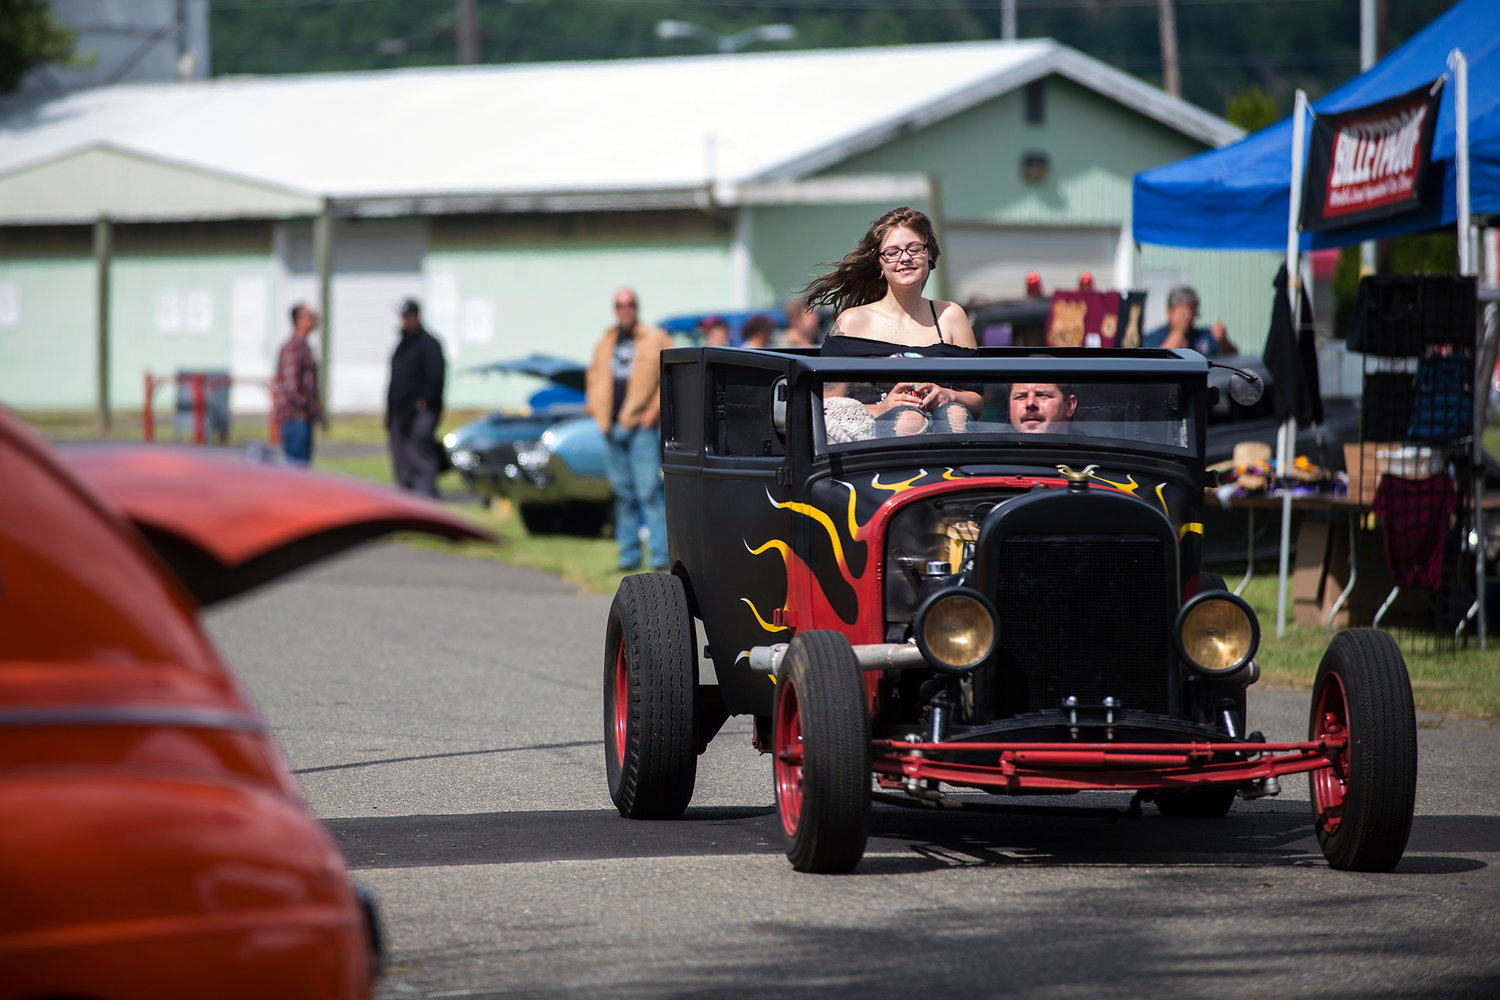 Hundreds of car enthusiasts showed up at the Southwest Washington Fairgrounds in Chehalis for the Billetproof Car Show last year. Owners of hot rods and custom cars revved their engines across the pavement at the fairgrounds.